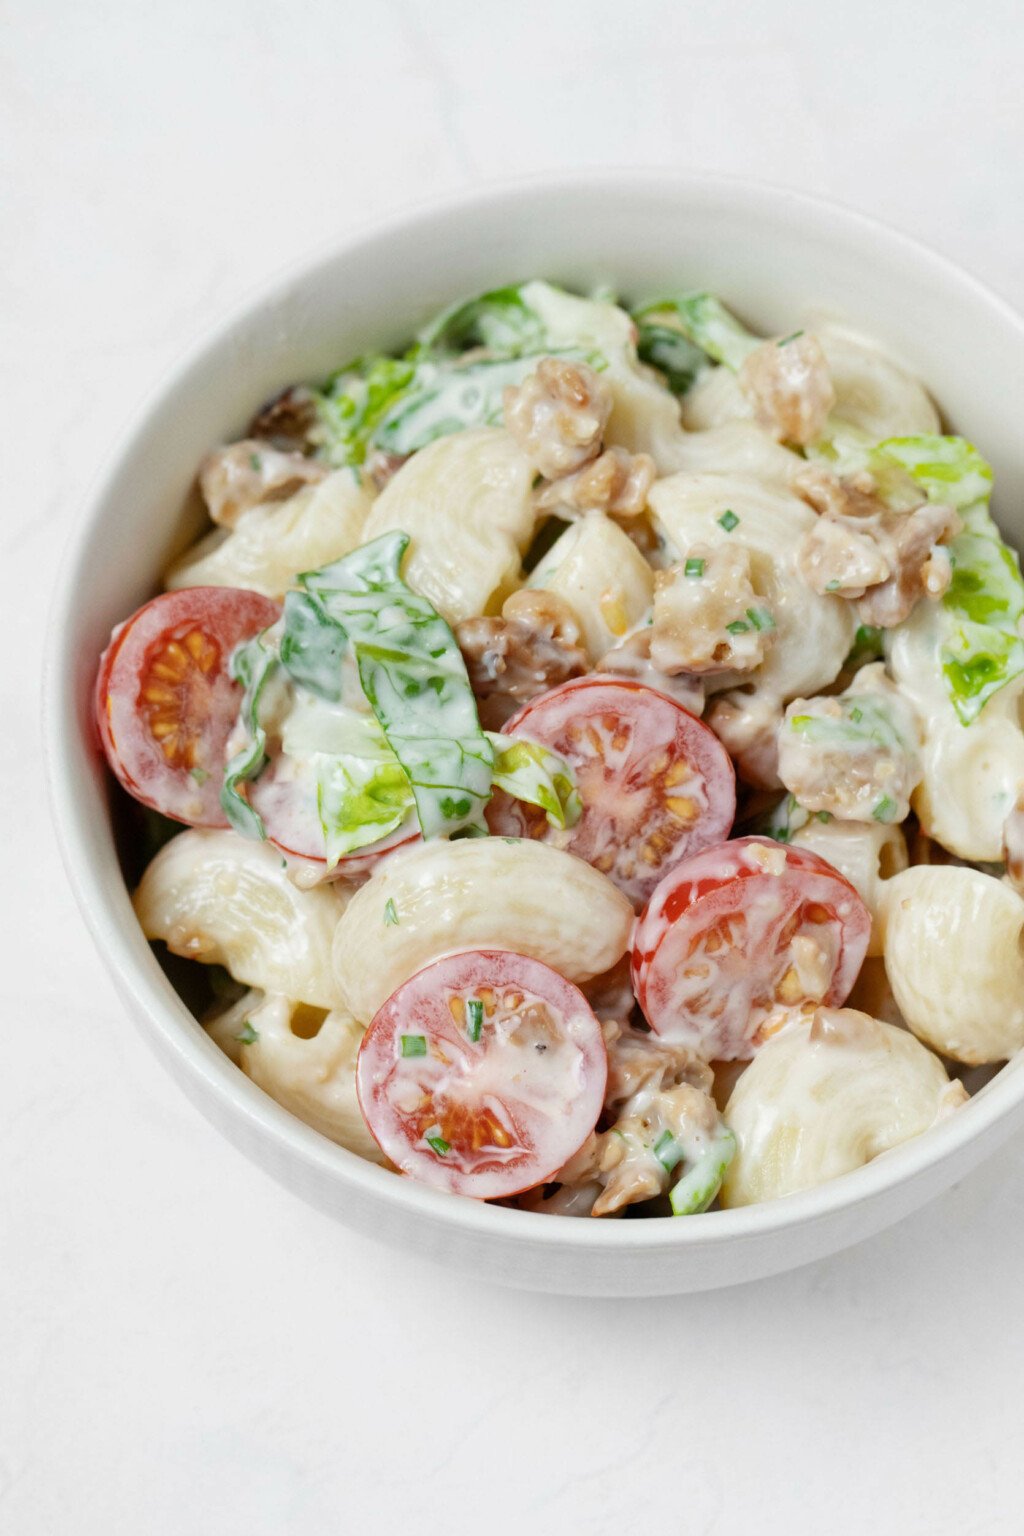 A round, white bowl is filled with a vegan BLT-inspired pasta salad, made with creamy dressing, cherry tomatoes, and chopped greens.